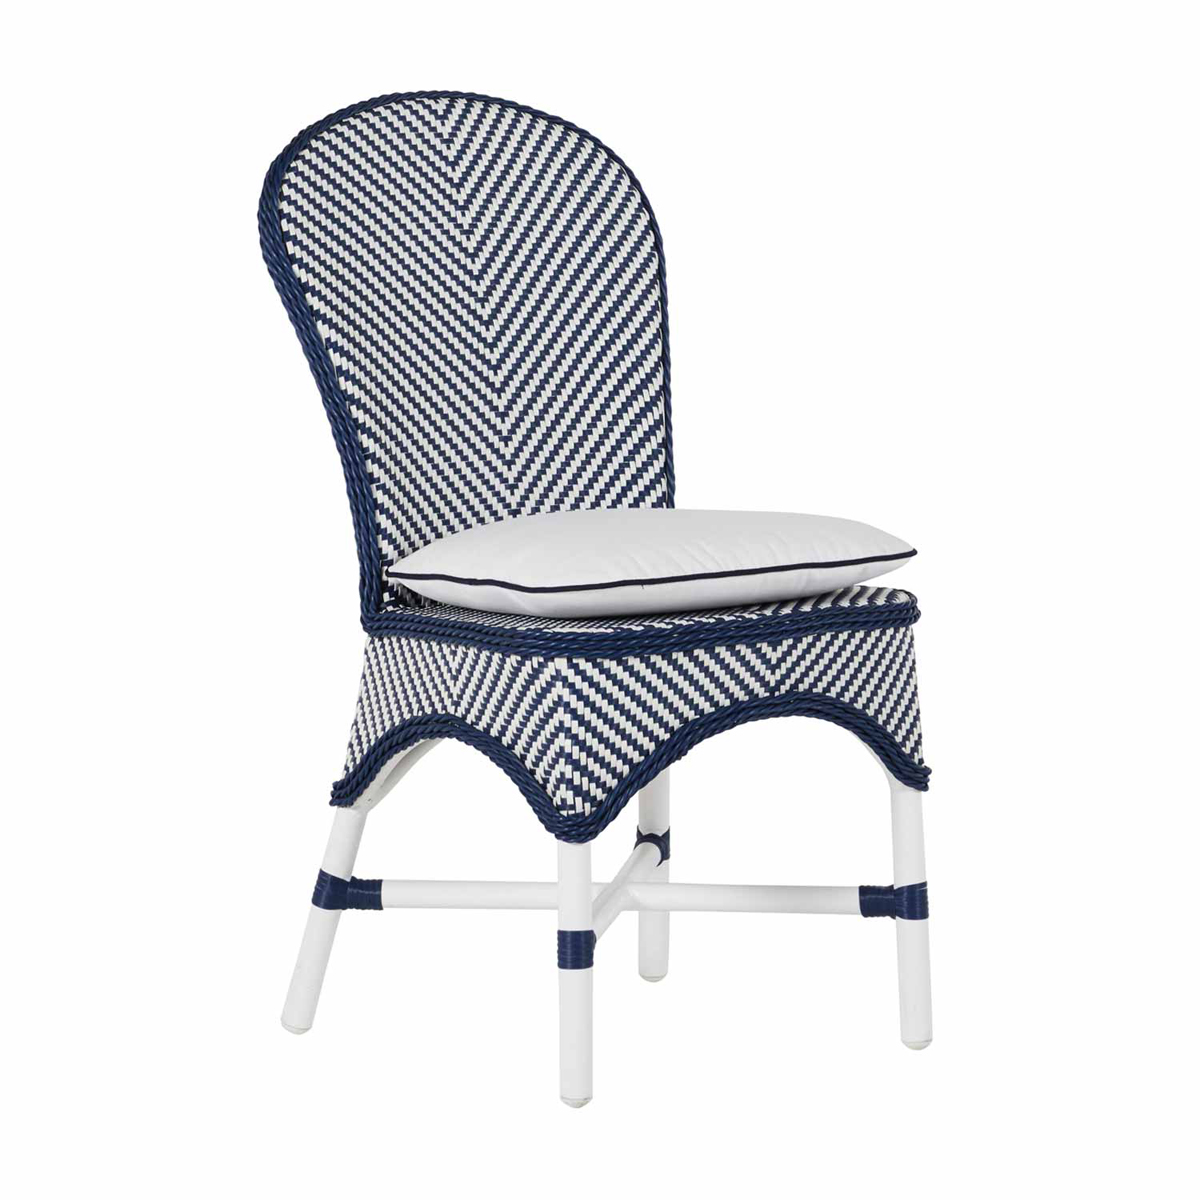 savoy side chair product image